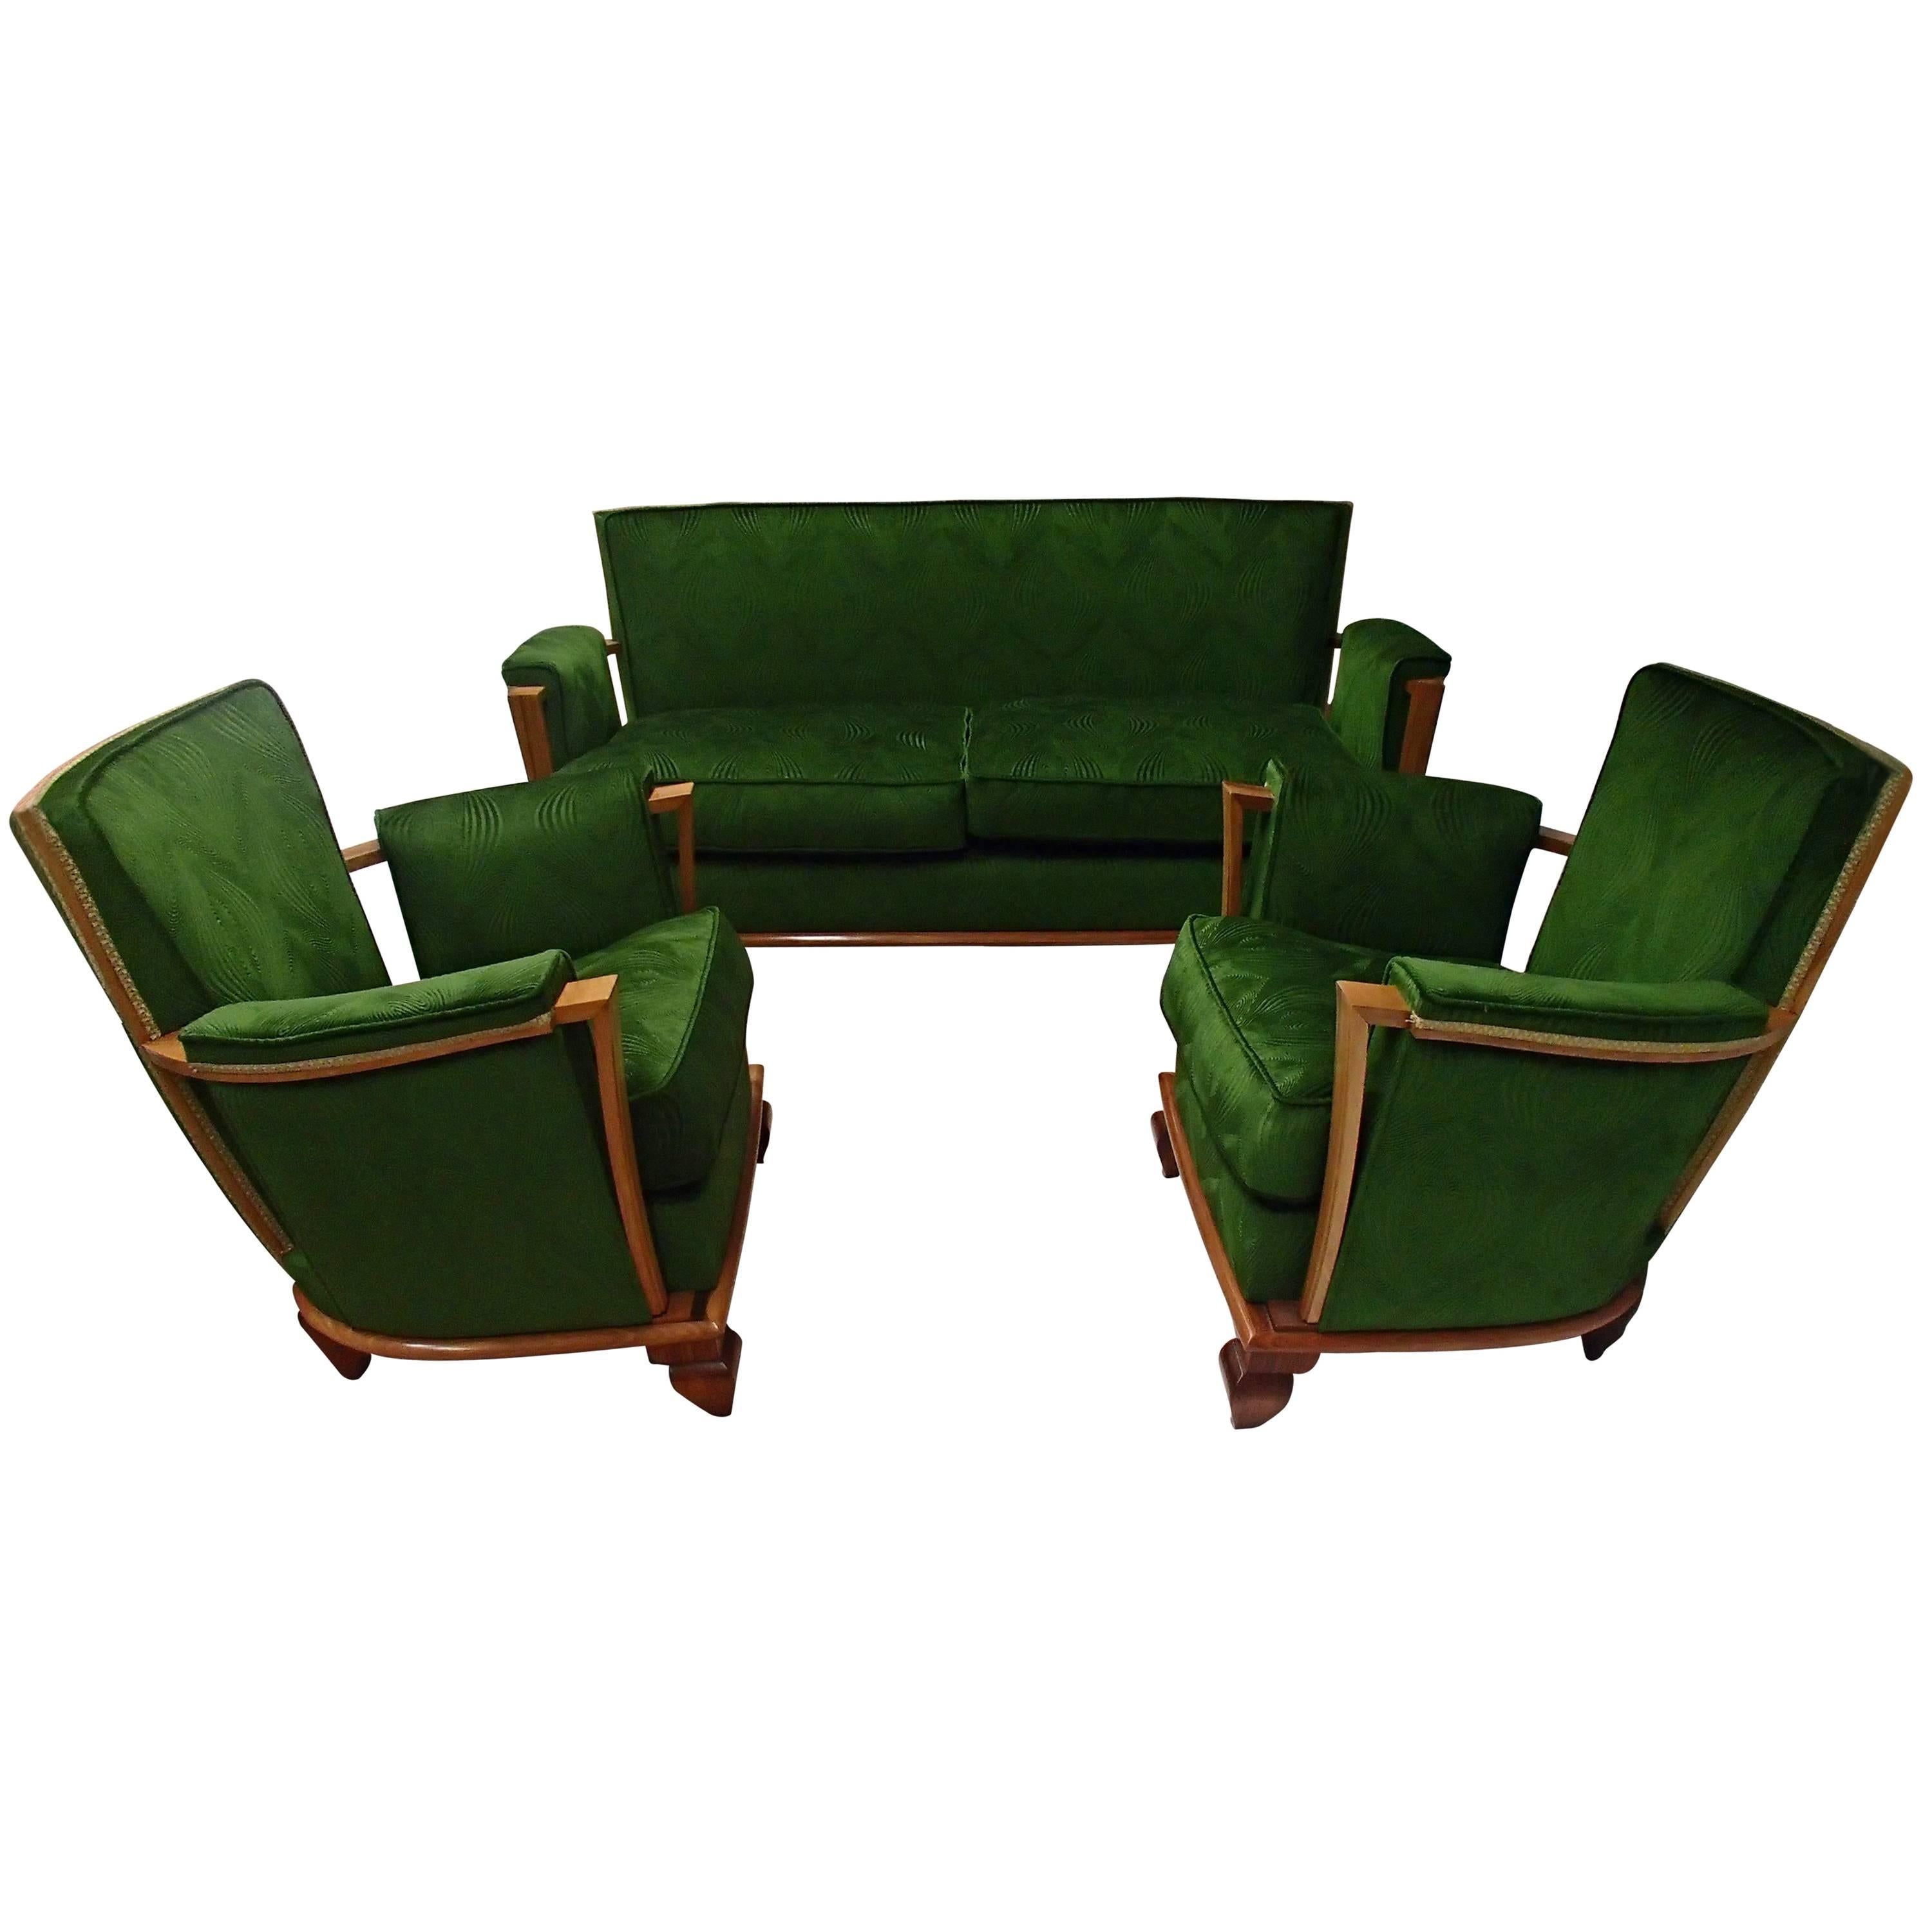 Art Deco Green Velours Three-Seat Sofa with Two Armchairs "Merkt" For Sale